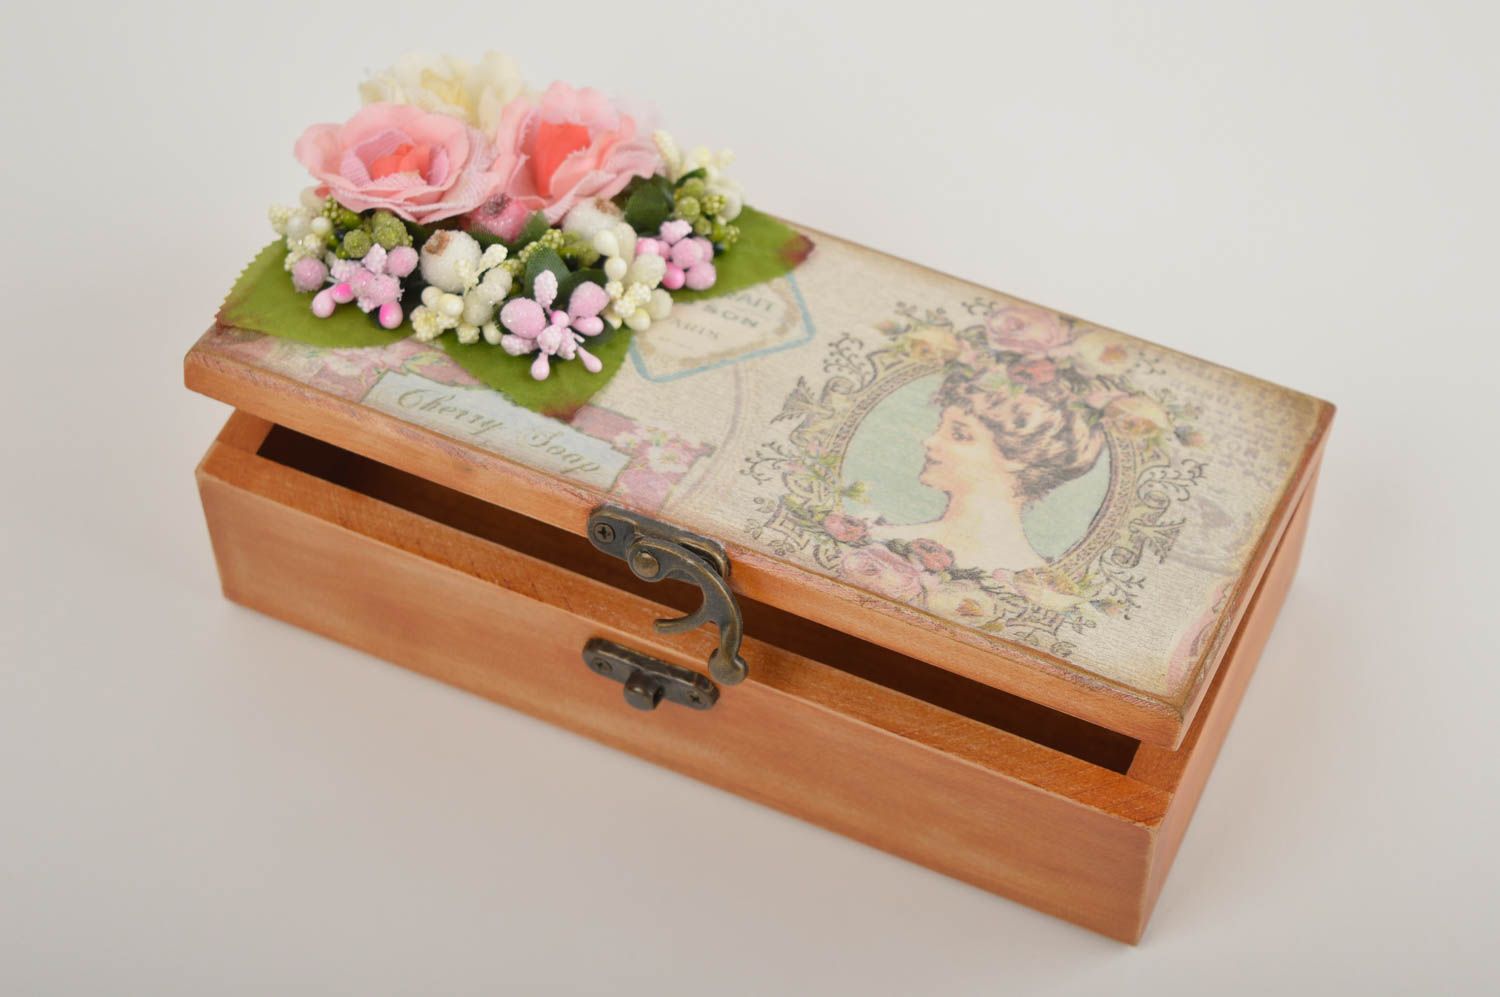 Handmade wooden jewelry box jewelry gift box vintage jewelry box gifts for her photo 2